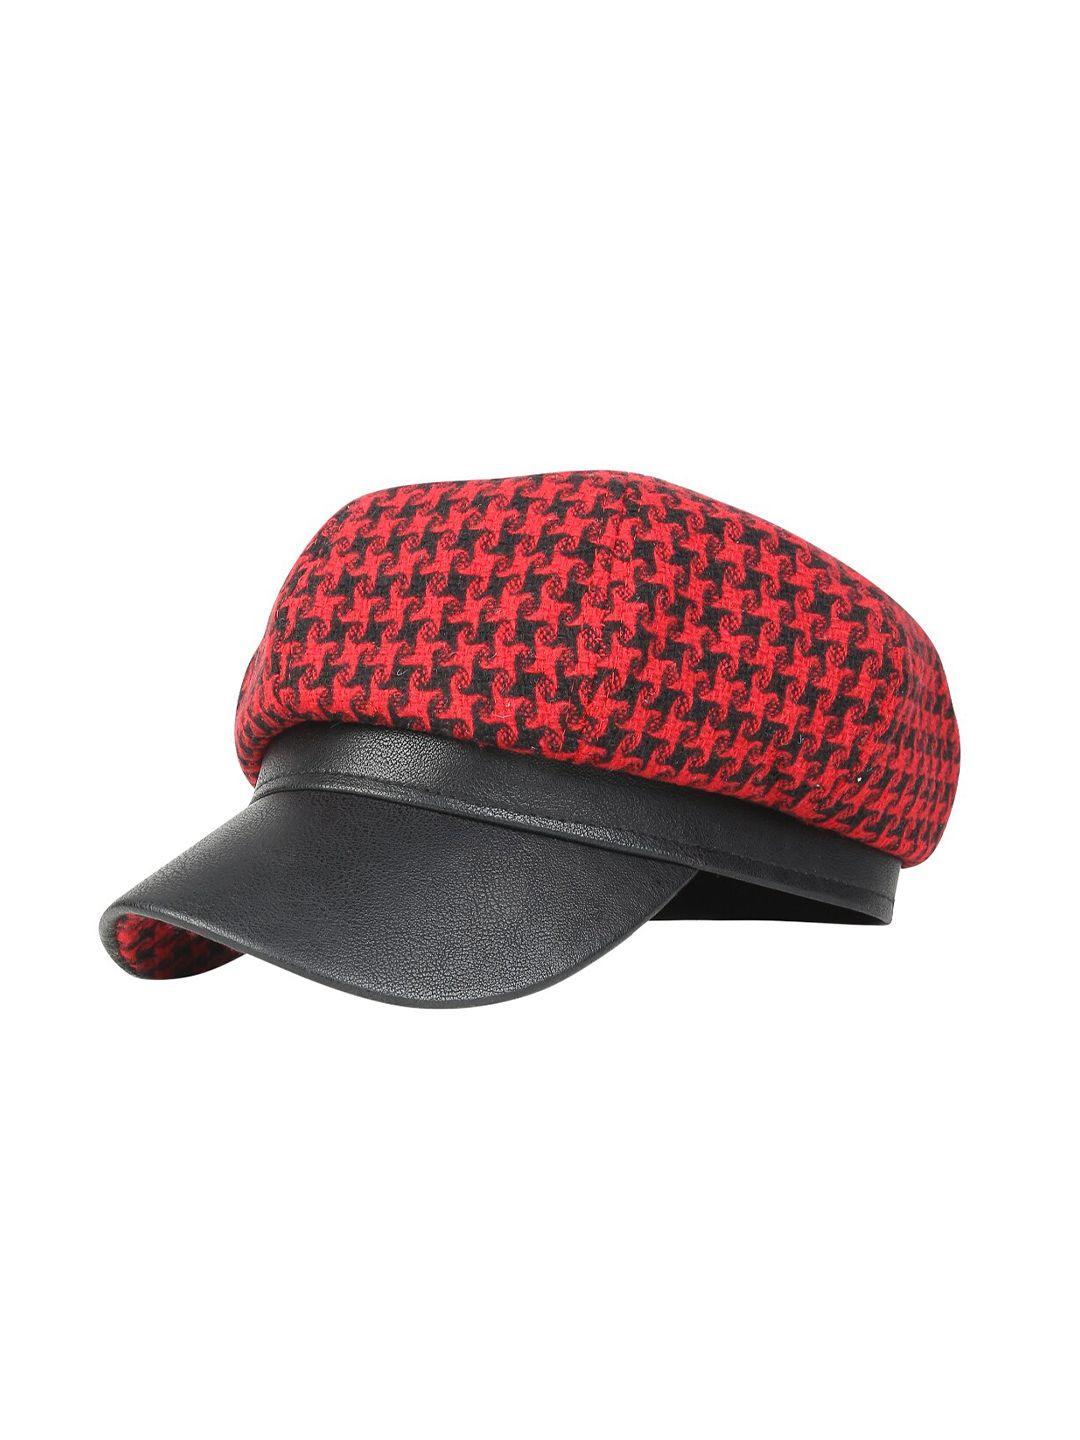 isweven unisex red & black printed ascot cap